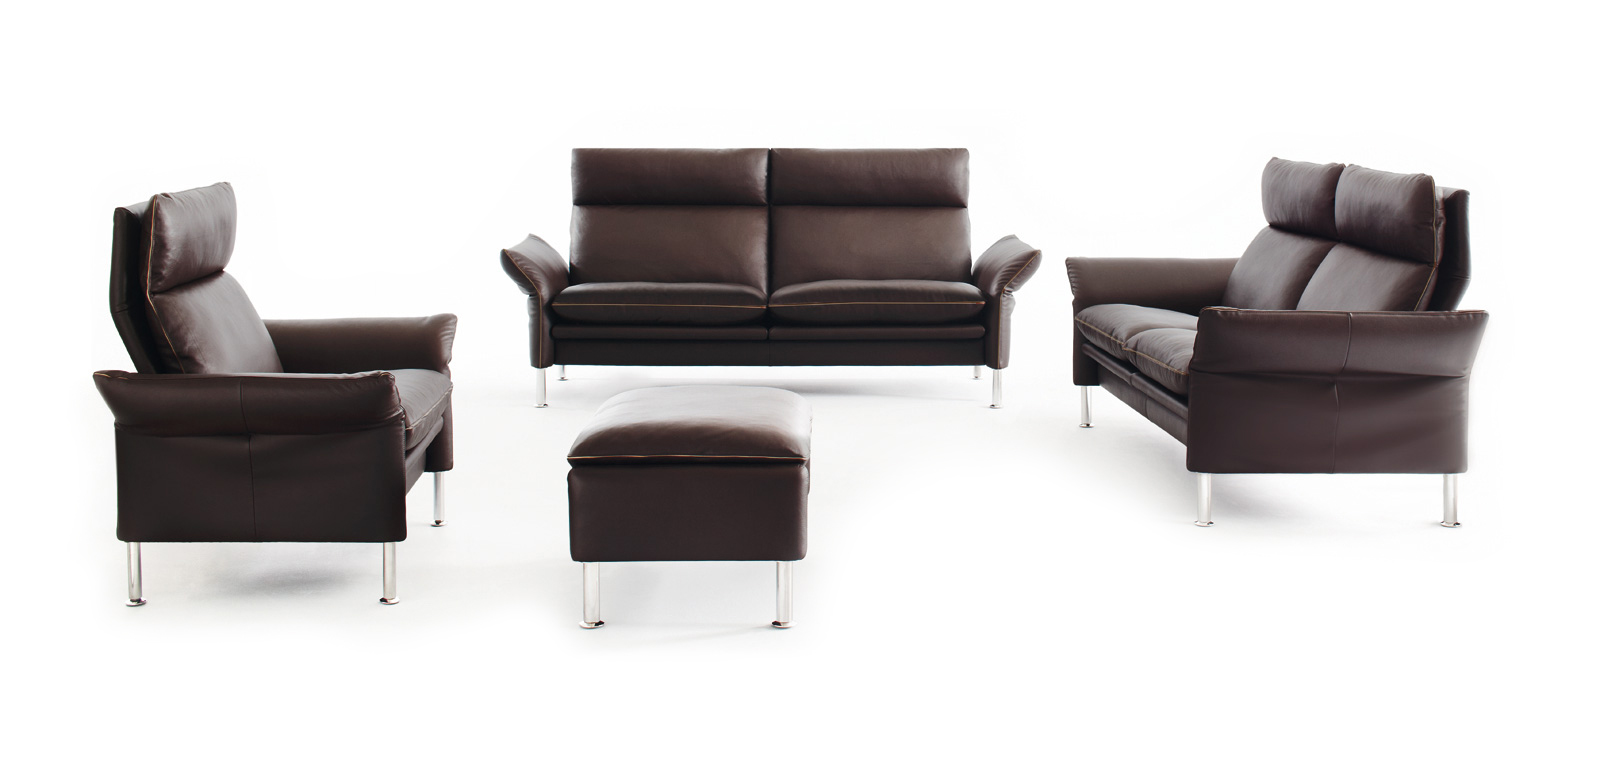 Detached Porto seating group consisting of two sofas, armchair and stool in dark brown leather.